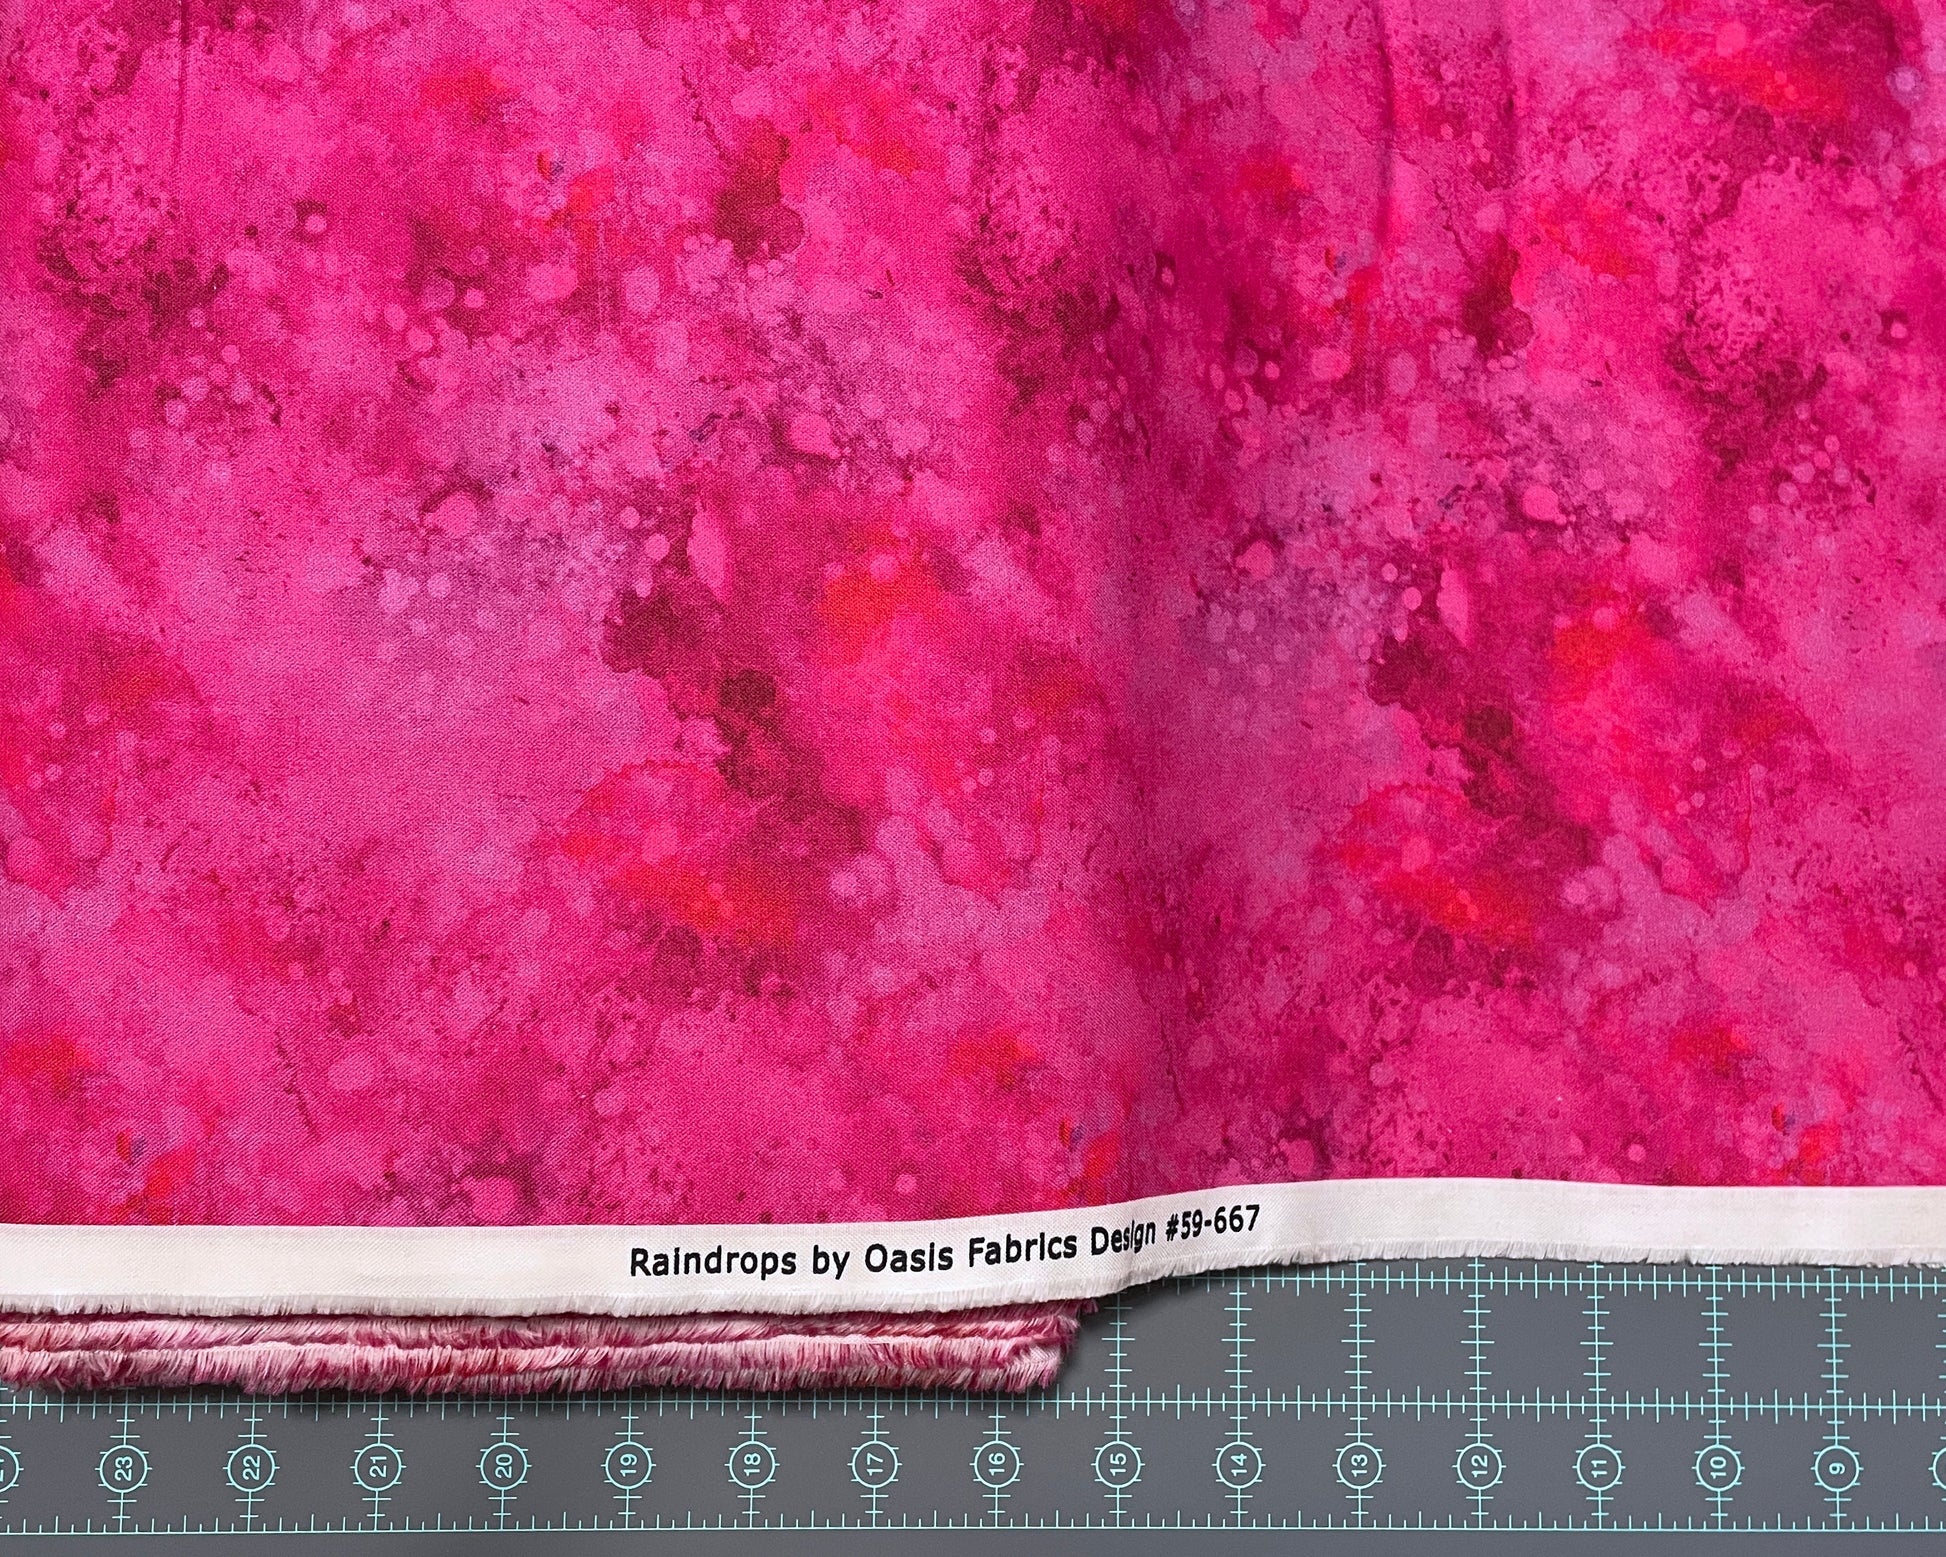 Fuchsia Blender Fabric - Raindrops Collection by Oasis Fabrics - 100% Cotton Fabric - Pink blender fabric colorful material - Ships NEXT DAY